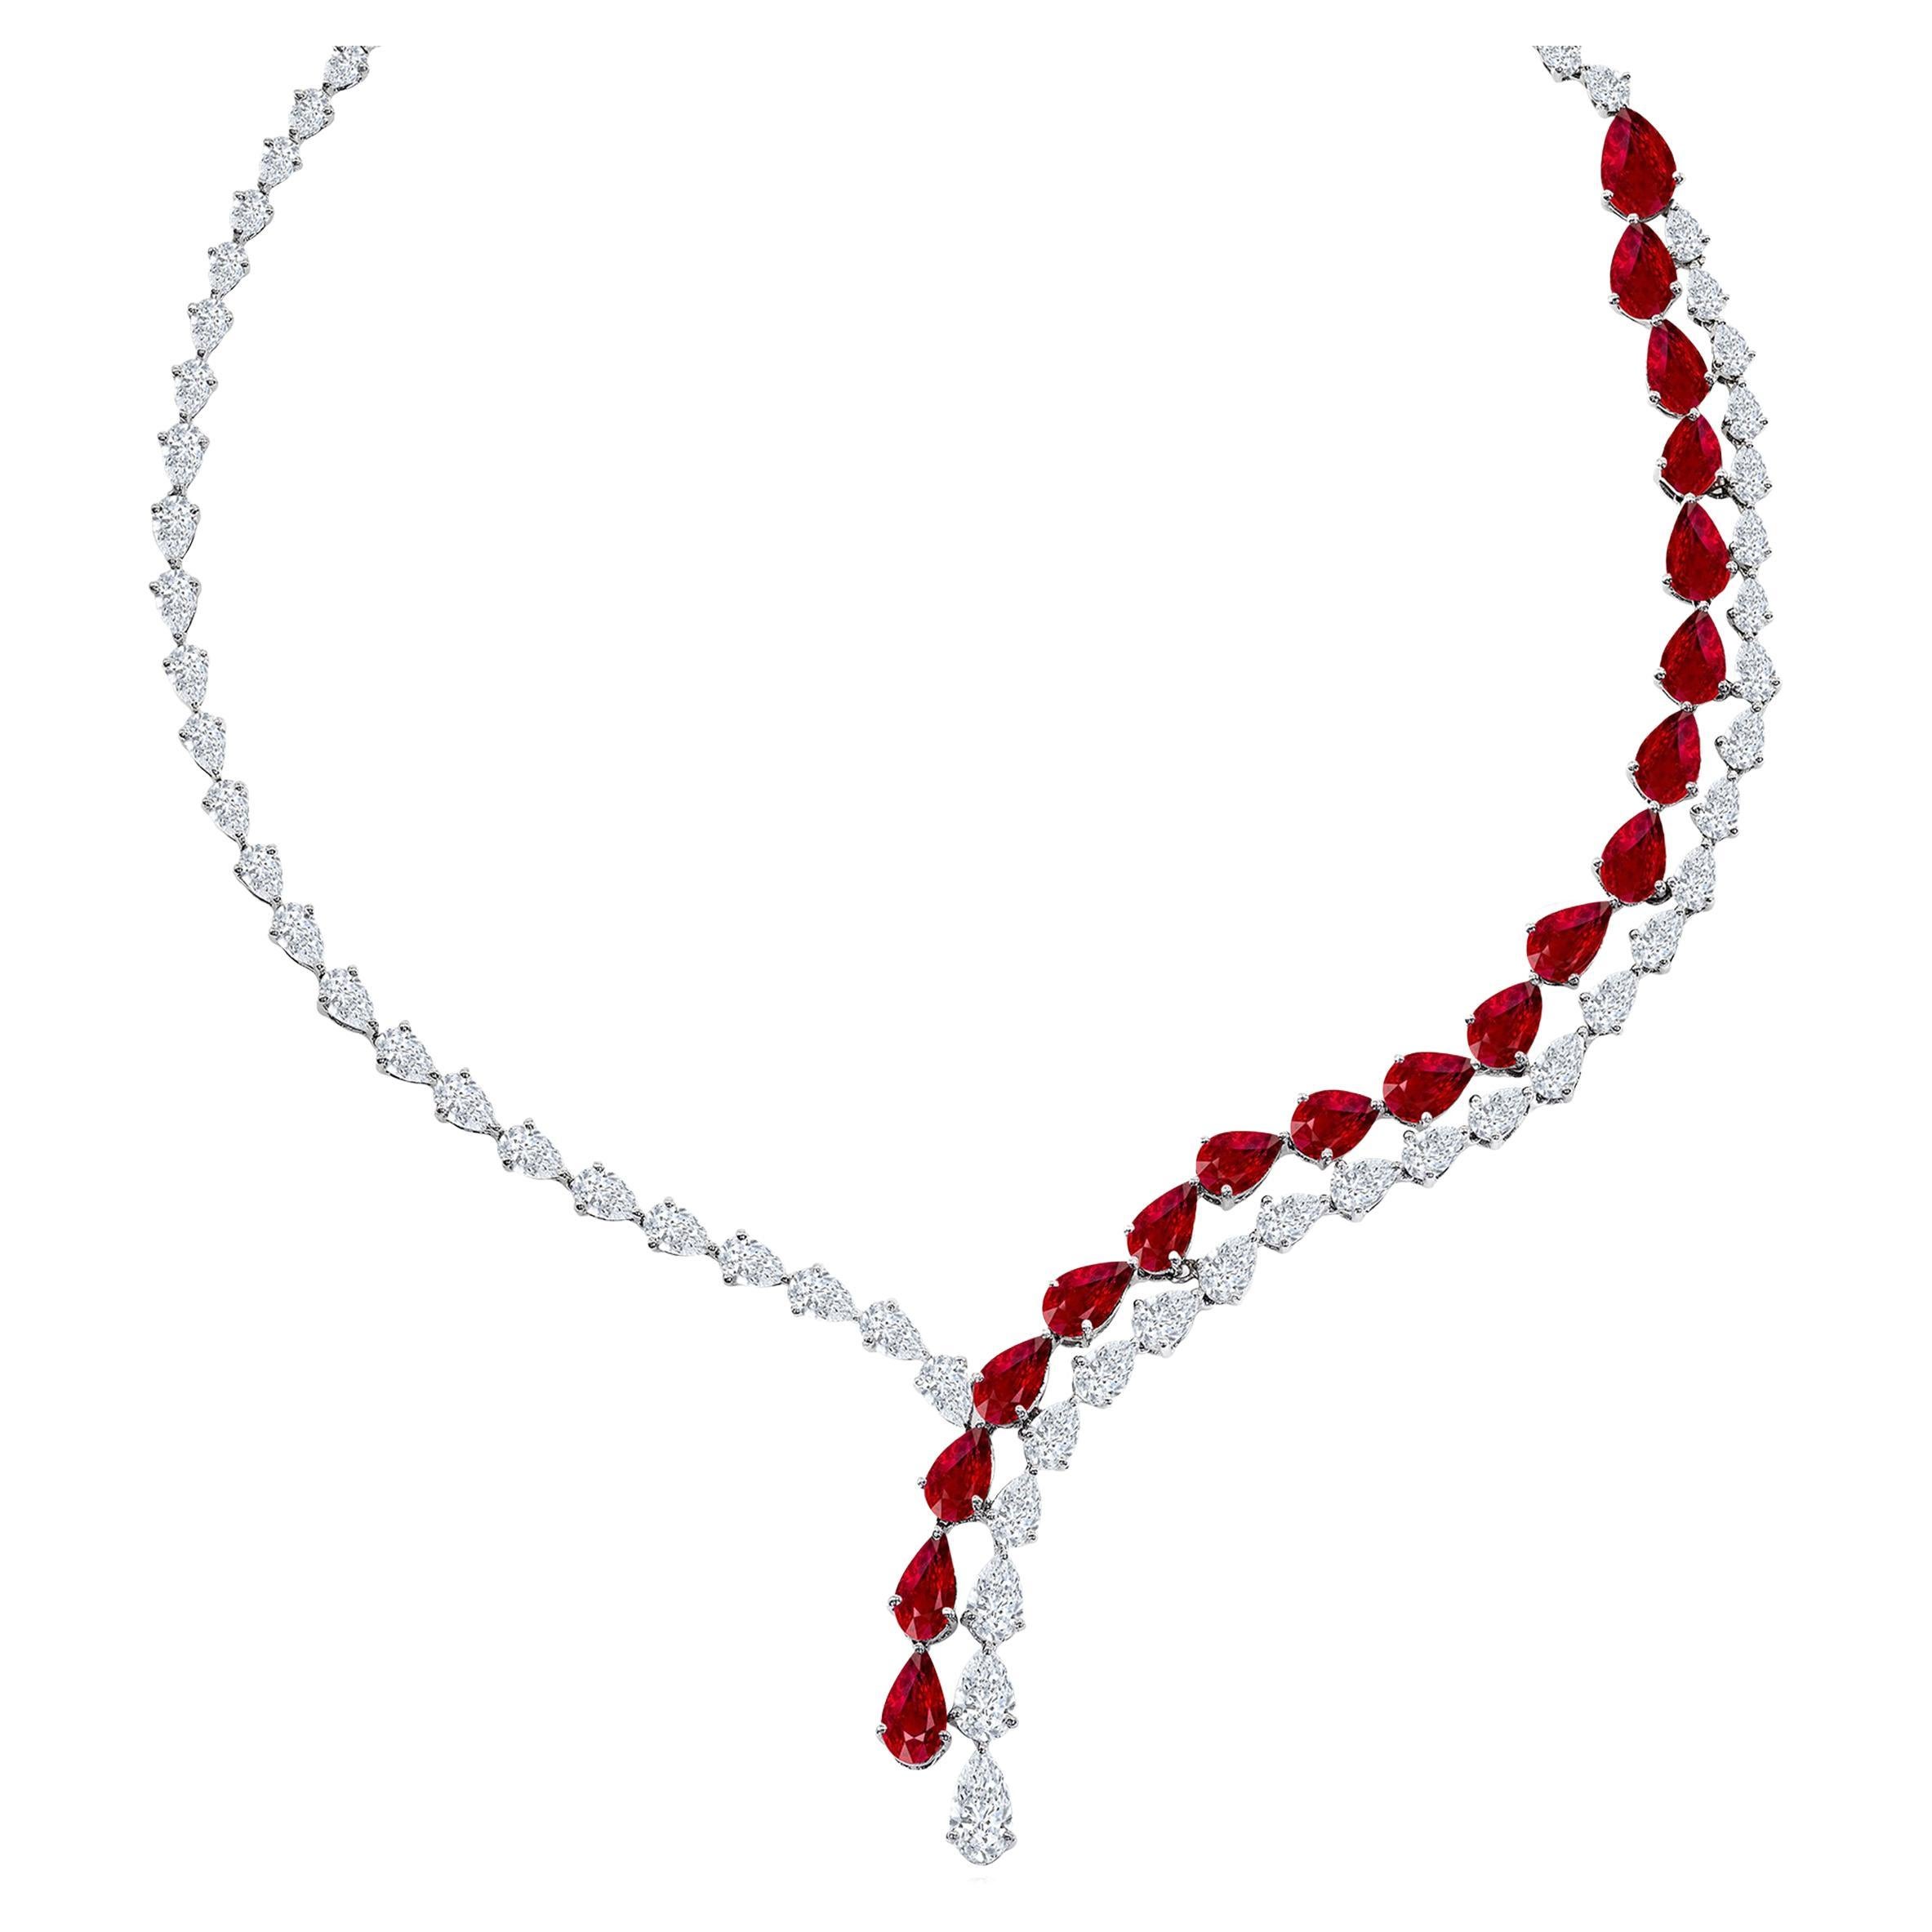 Certified 20.62 Carat Pear Shape Ruby and Diamond Drop Necklace in Platinum For Sale